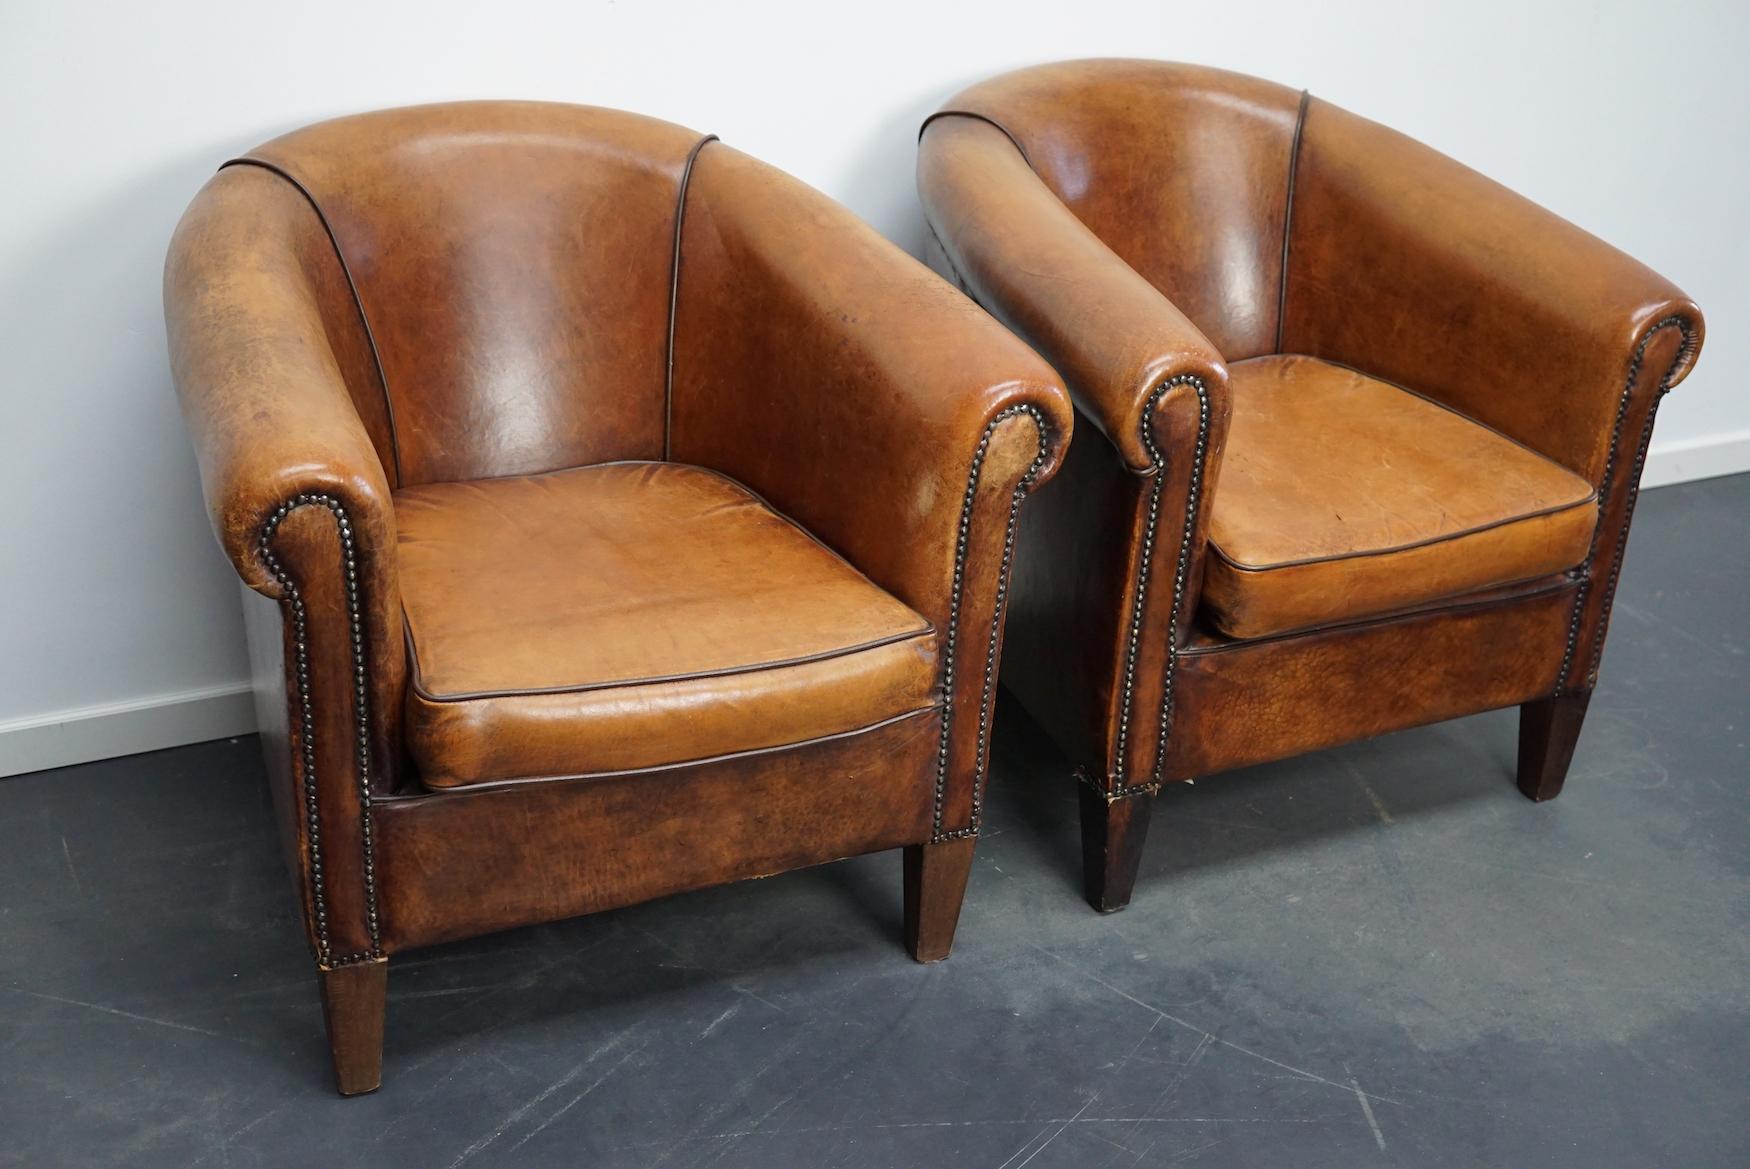 This pair of cognac-colored leather club chairs come from the Netherlands. They are upholstered with cognac-colored leather and feature metal rivets and wooden legs. This set also includes the footstool which is quite uncommon.